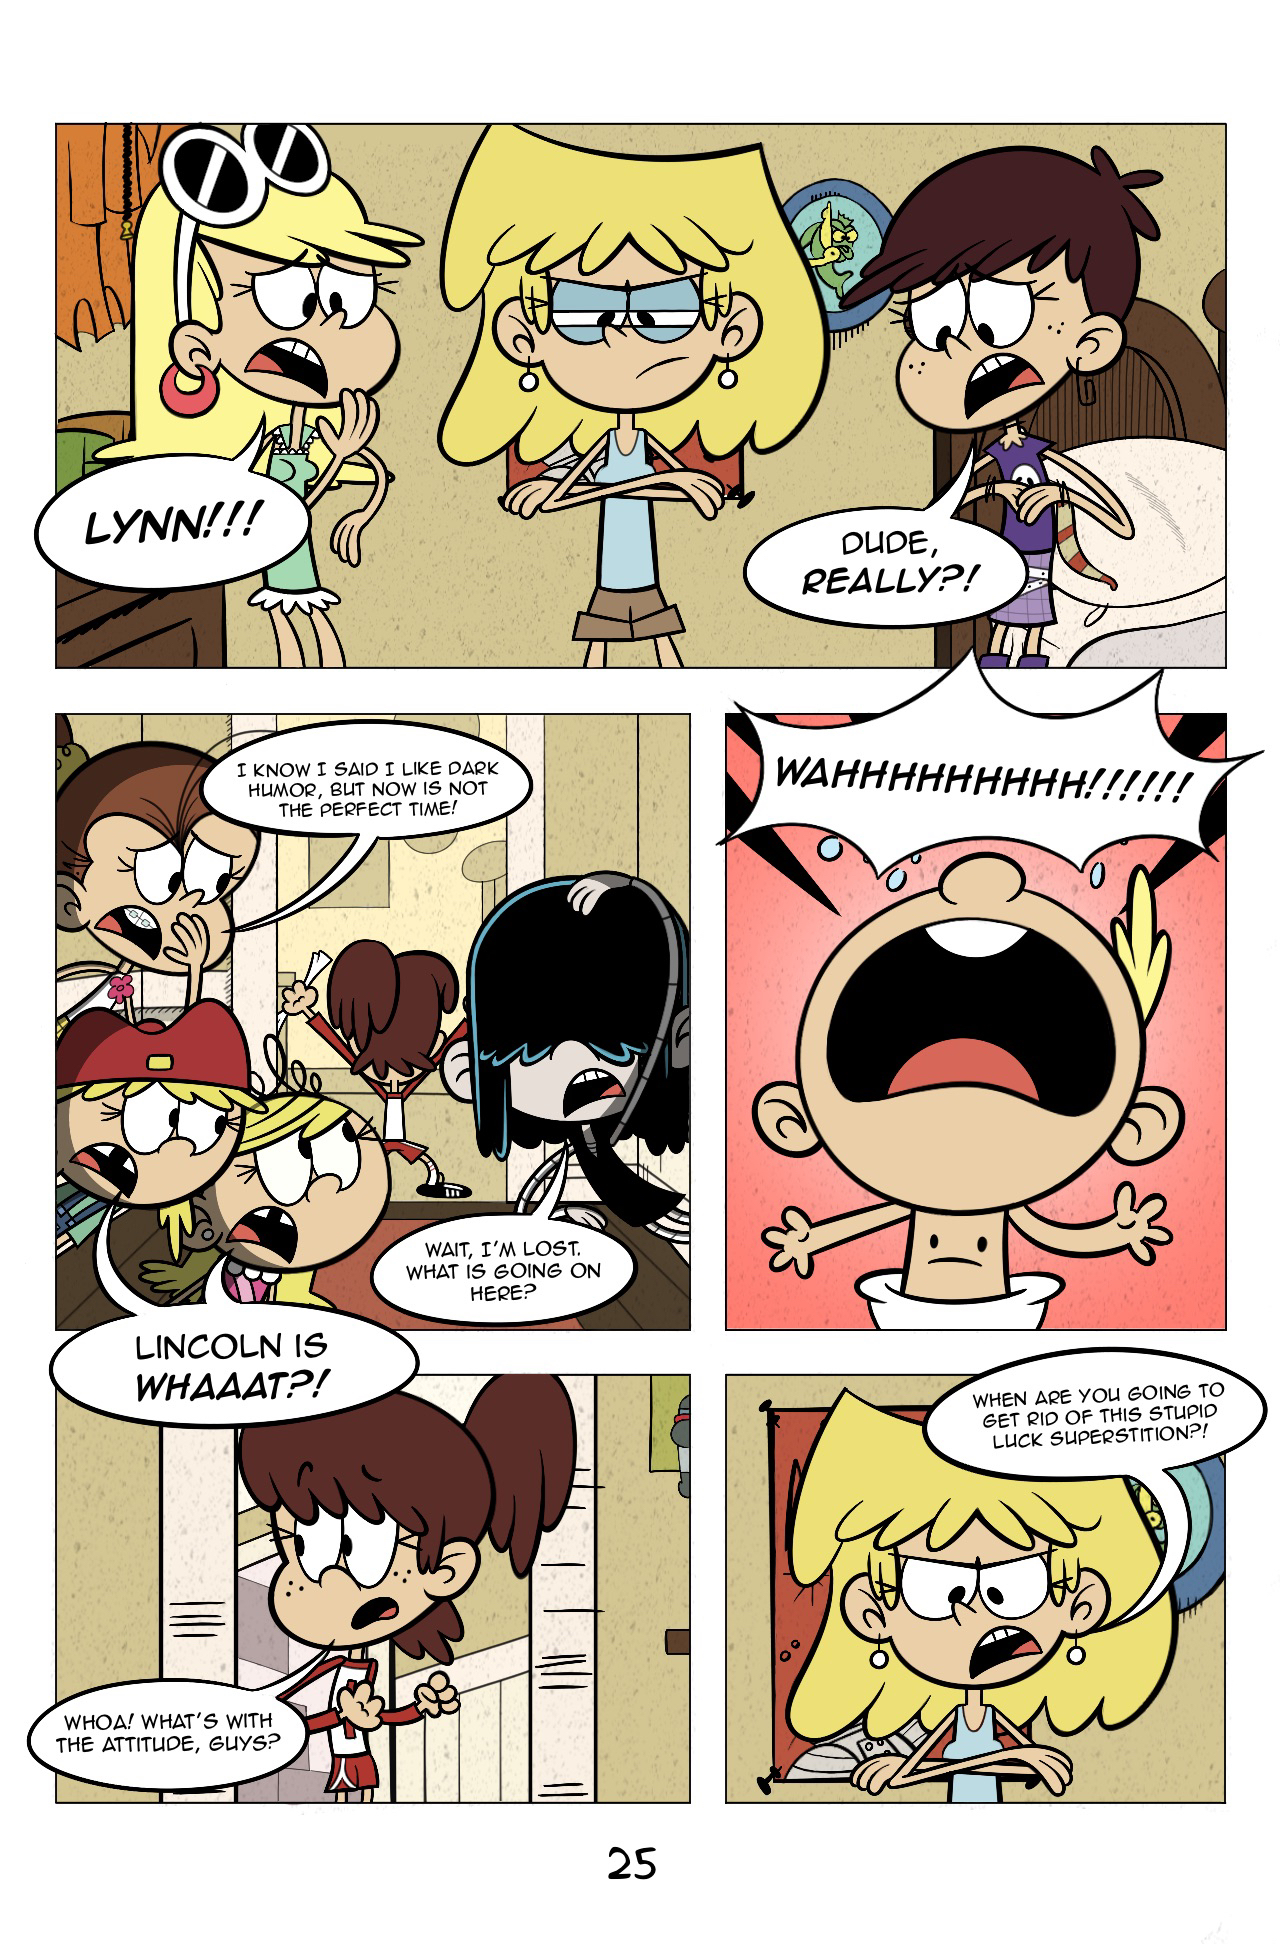 The Royal Woods Adventures: Issue 2 - Page 25 by NickelodeonFan1990 on ...